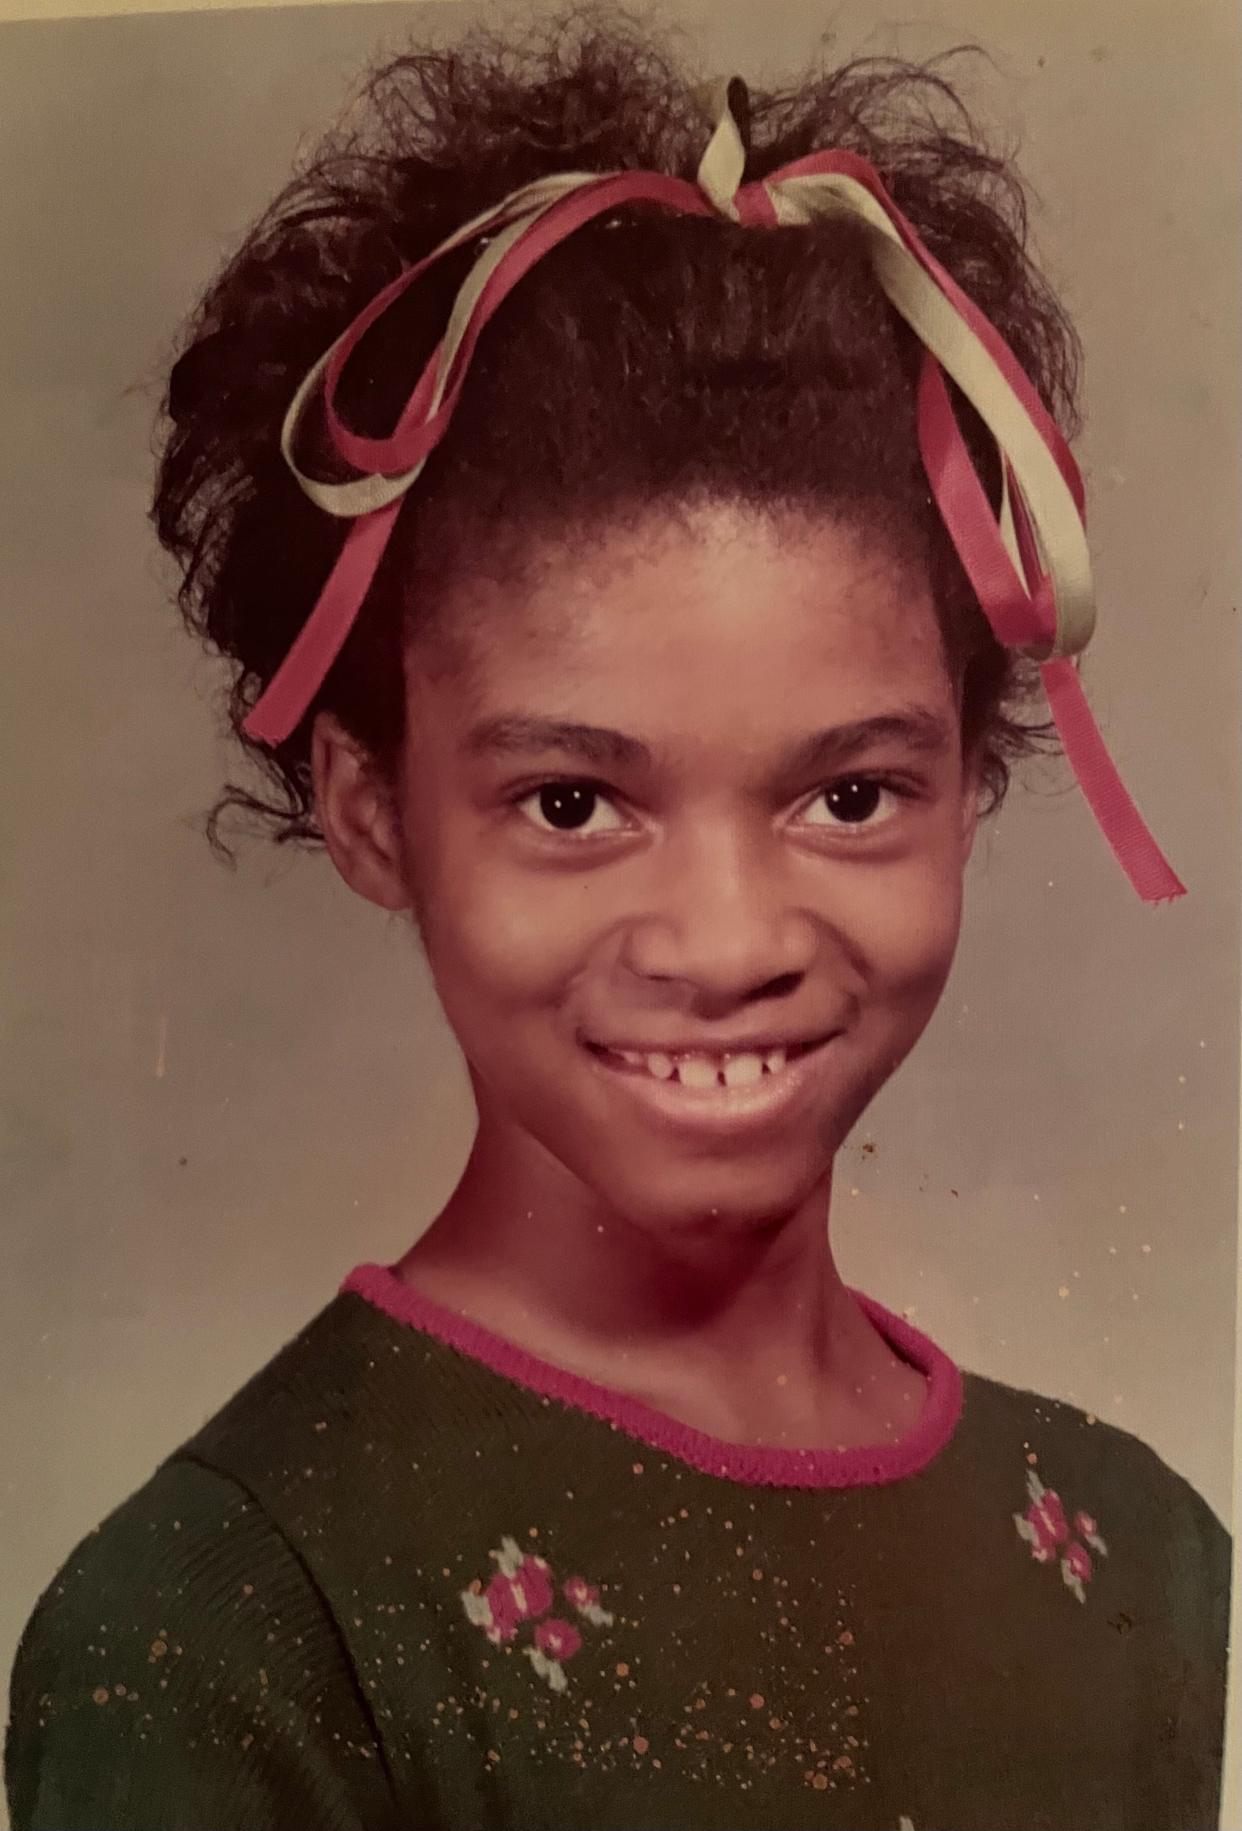 Yvette Norwood, seen here at age 11, grew up in Detroit. Her family played gospel music at home. When her parents left, she and her friends sang Motown. Yet jazz on the radio was capturing her ears, and later her heart.